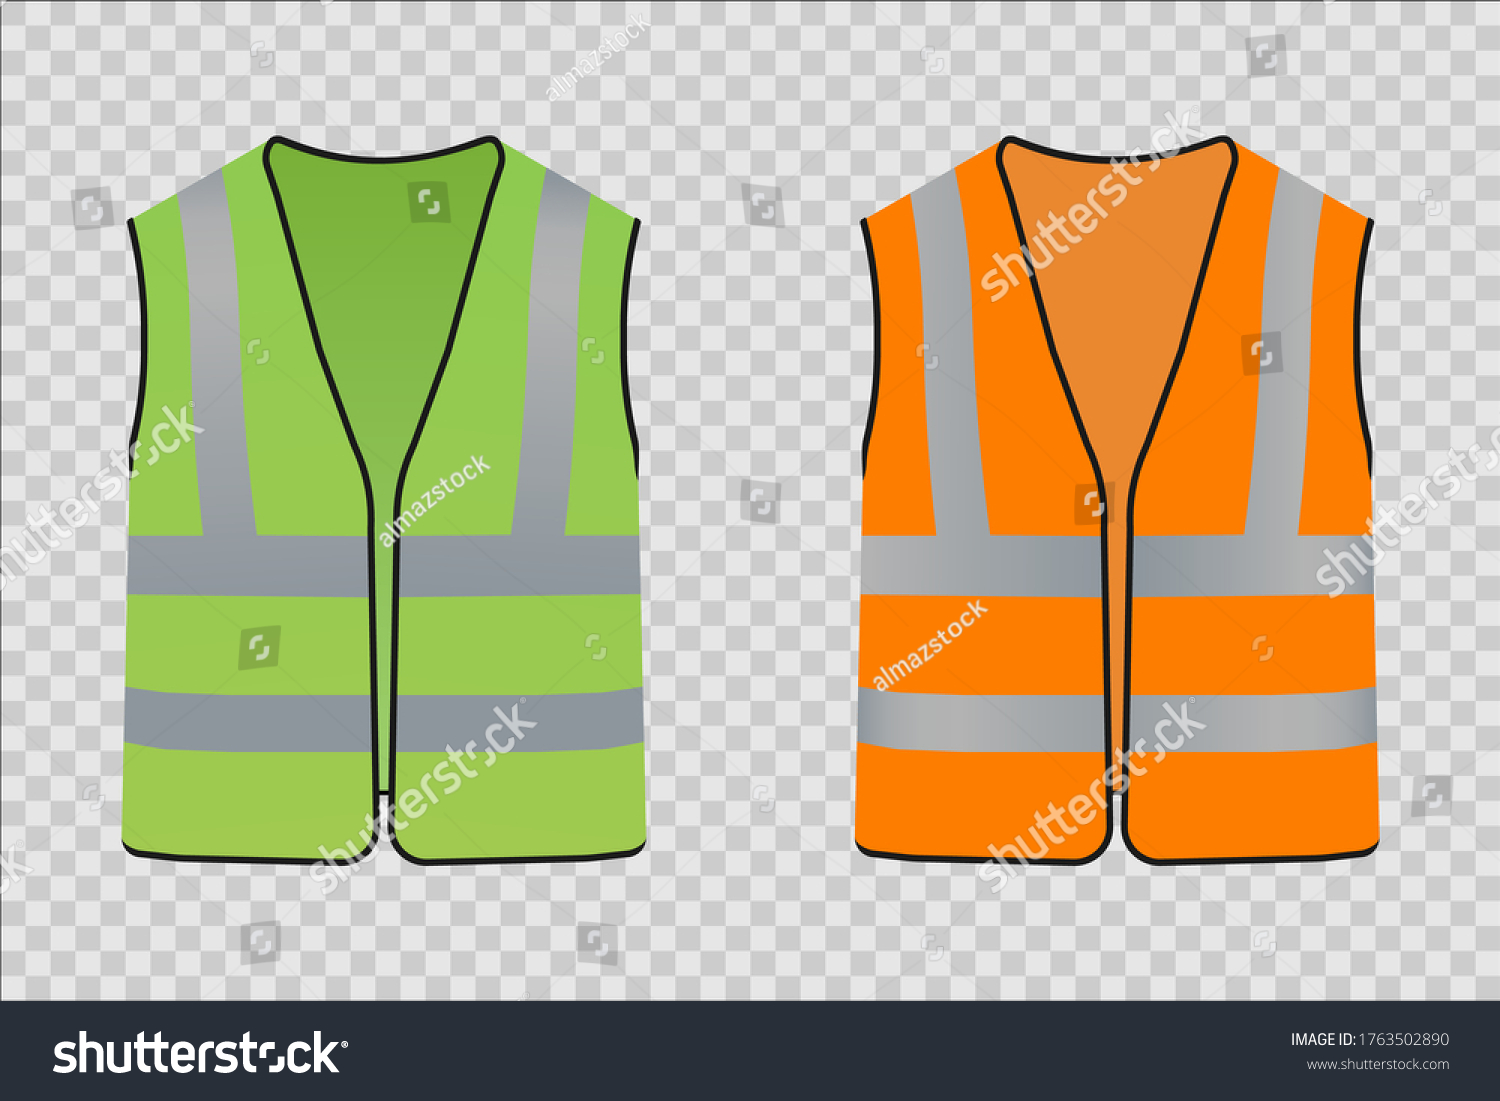 Reflective Safety Vest People Orange Green Stock Vector (Royalty Free ...